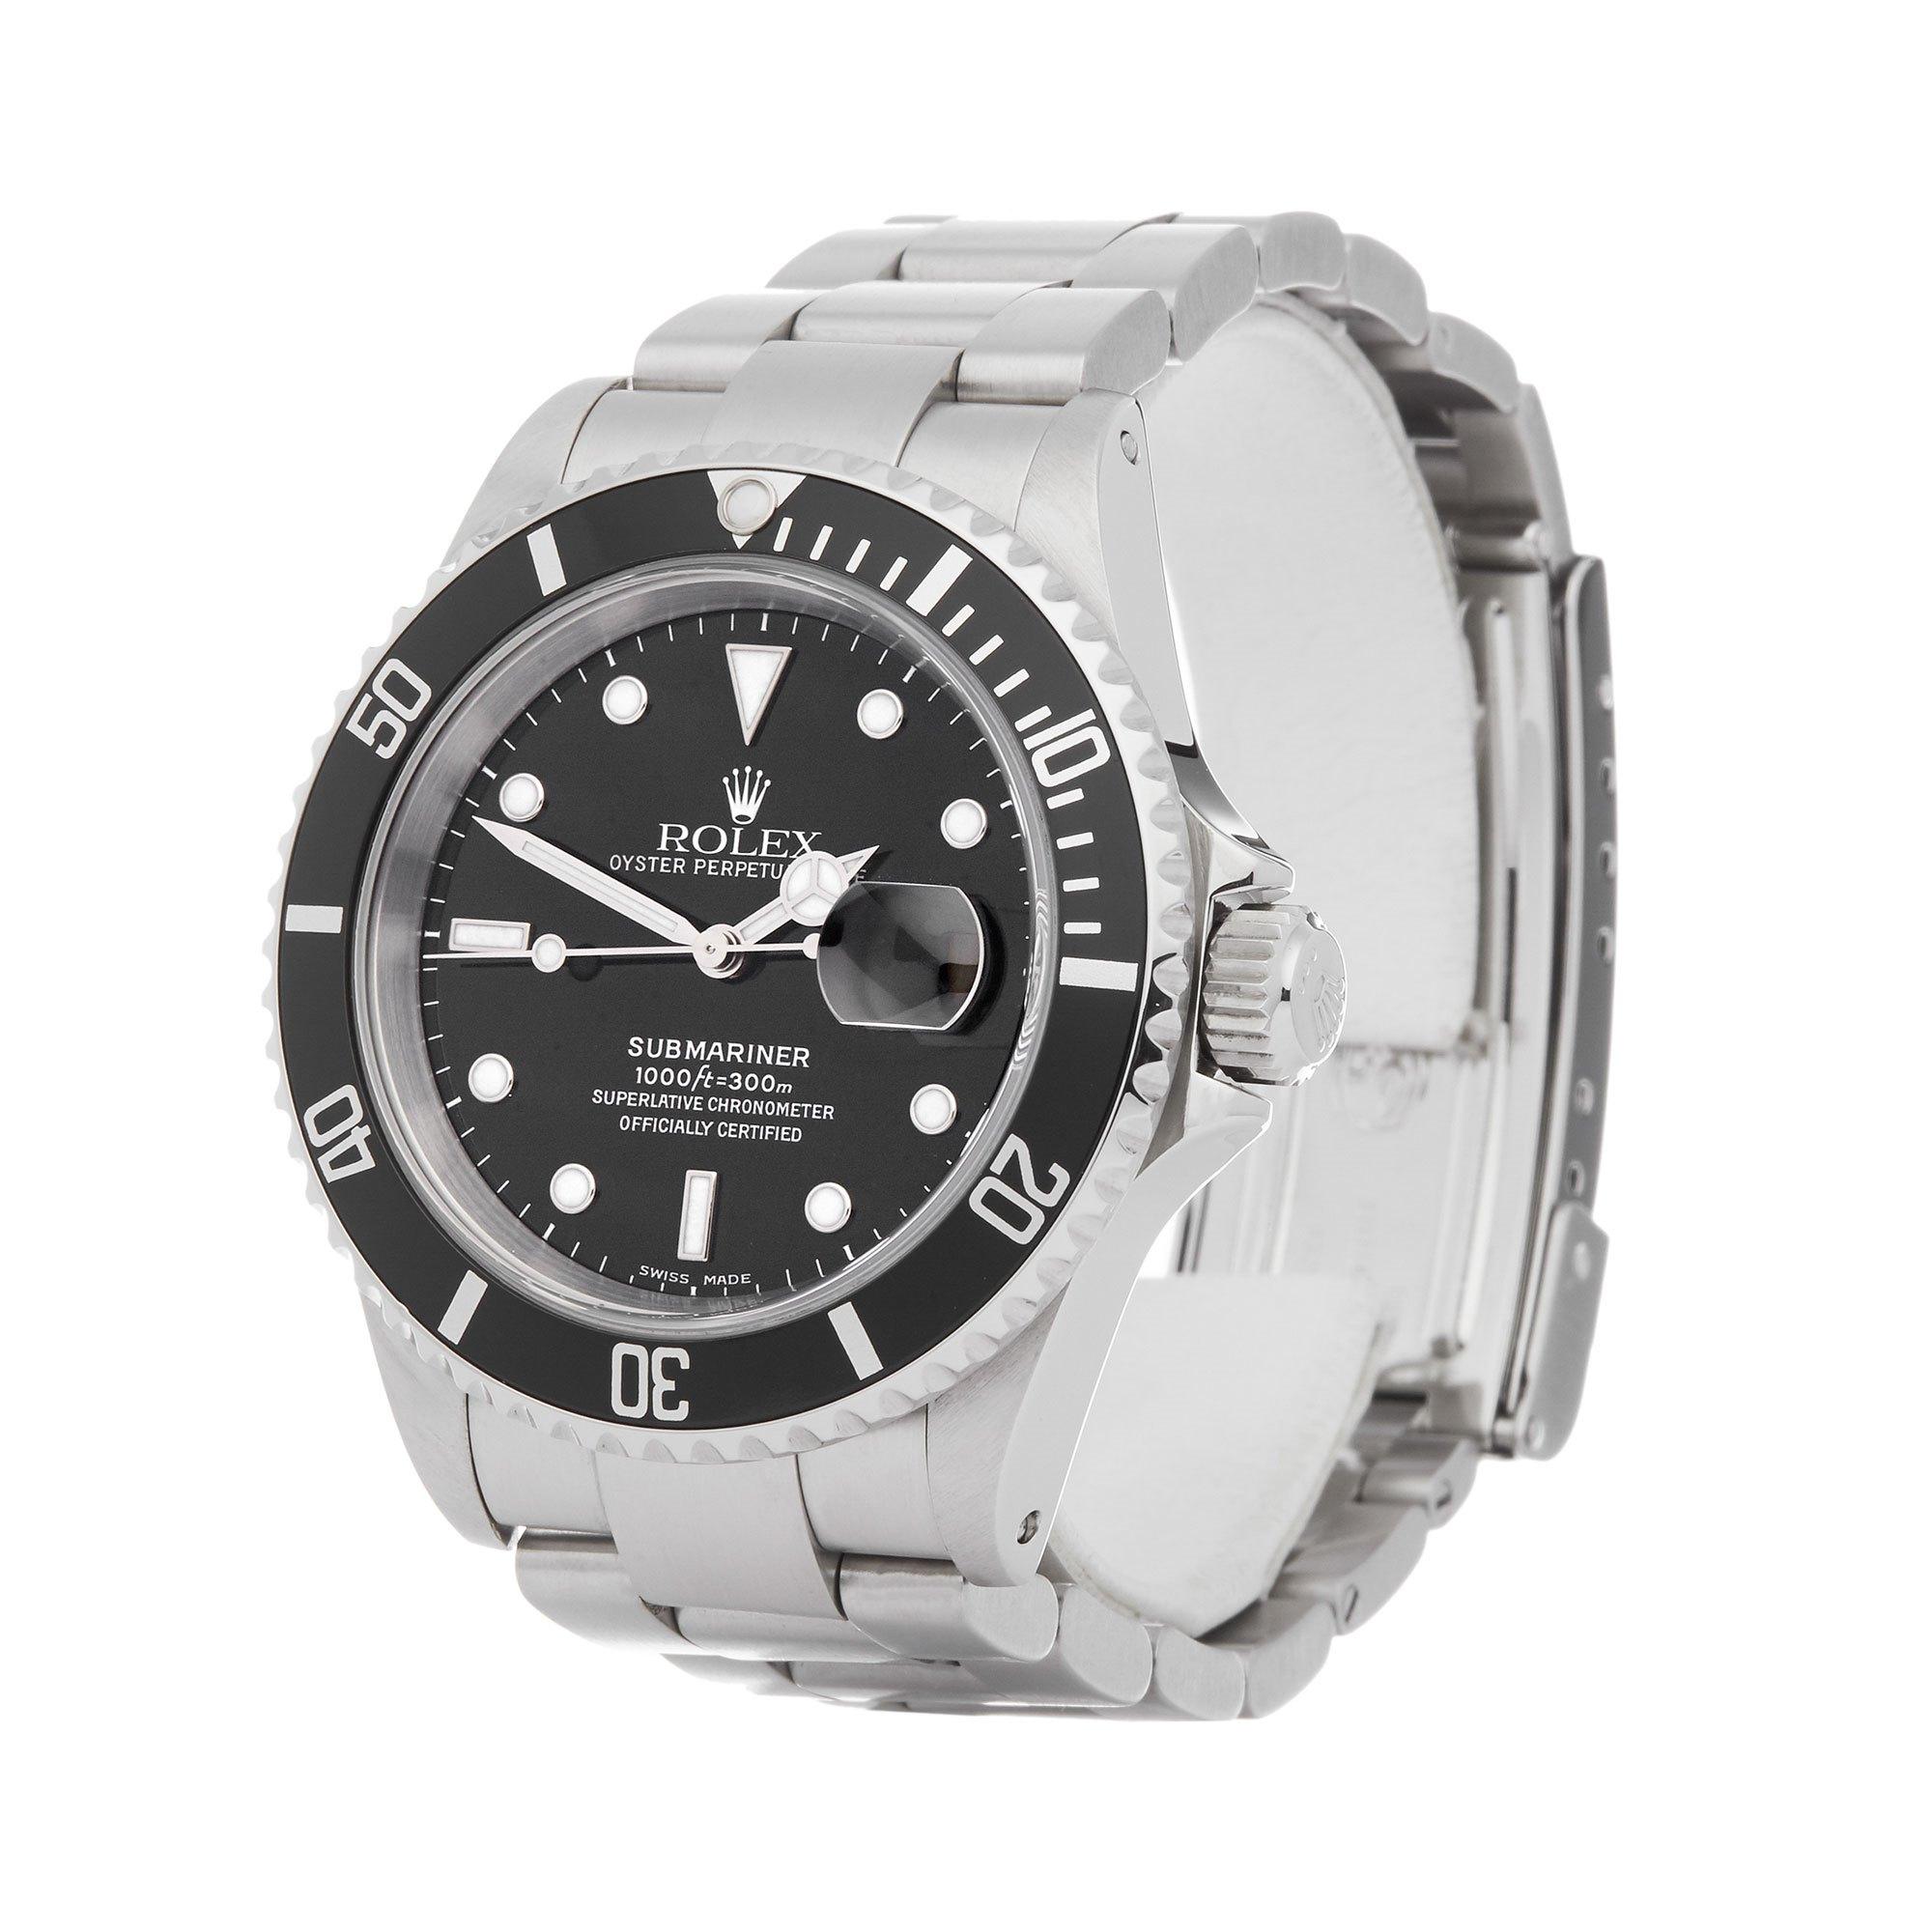 Xupes Reference: W007601
Manufacturer: Rolex
Model: Submariner
Model Variant: Date
Model Number: 16610
Age: 30-06-2001
Gender: Men
Complete With: Rolex Box, Manuals, Guarantee, Calendar Card, Card Holder & Swing Tag
Dial: Black Other
Glass: Sapphire